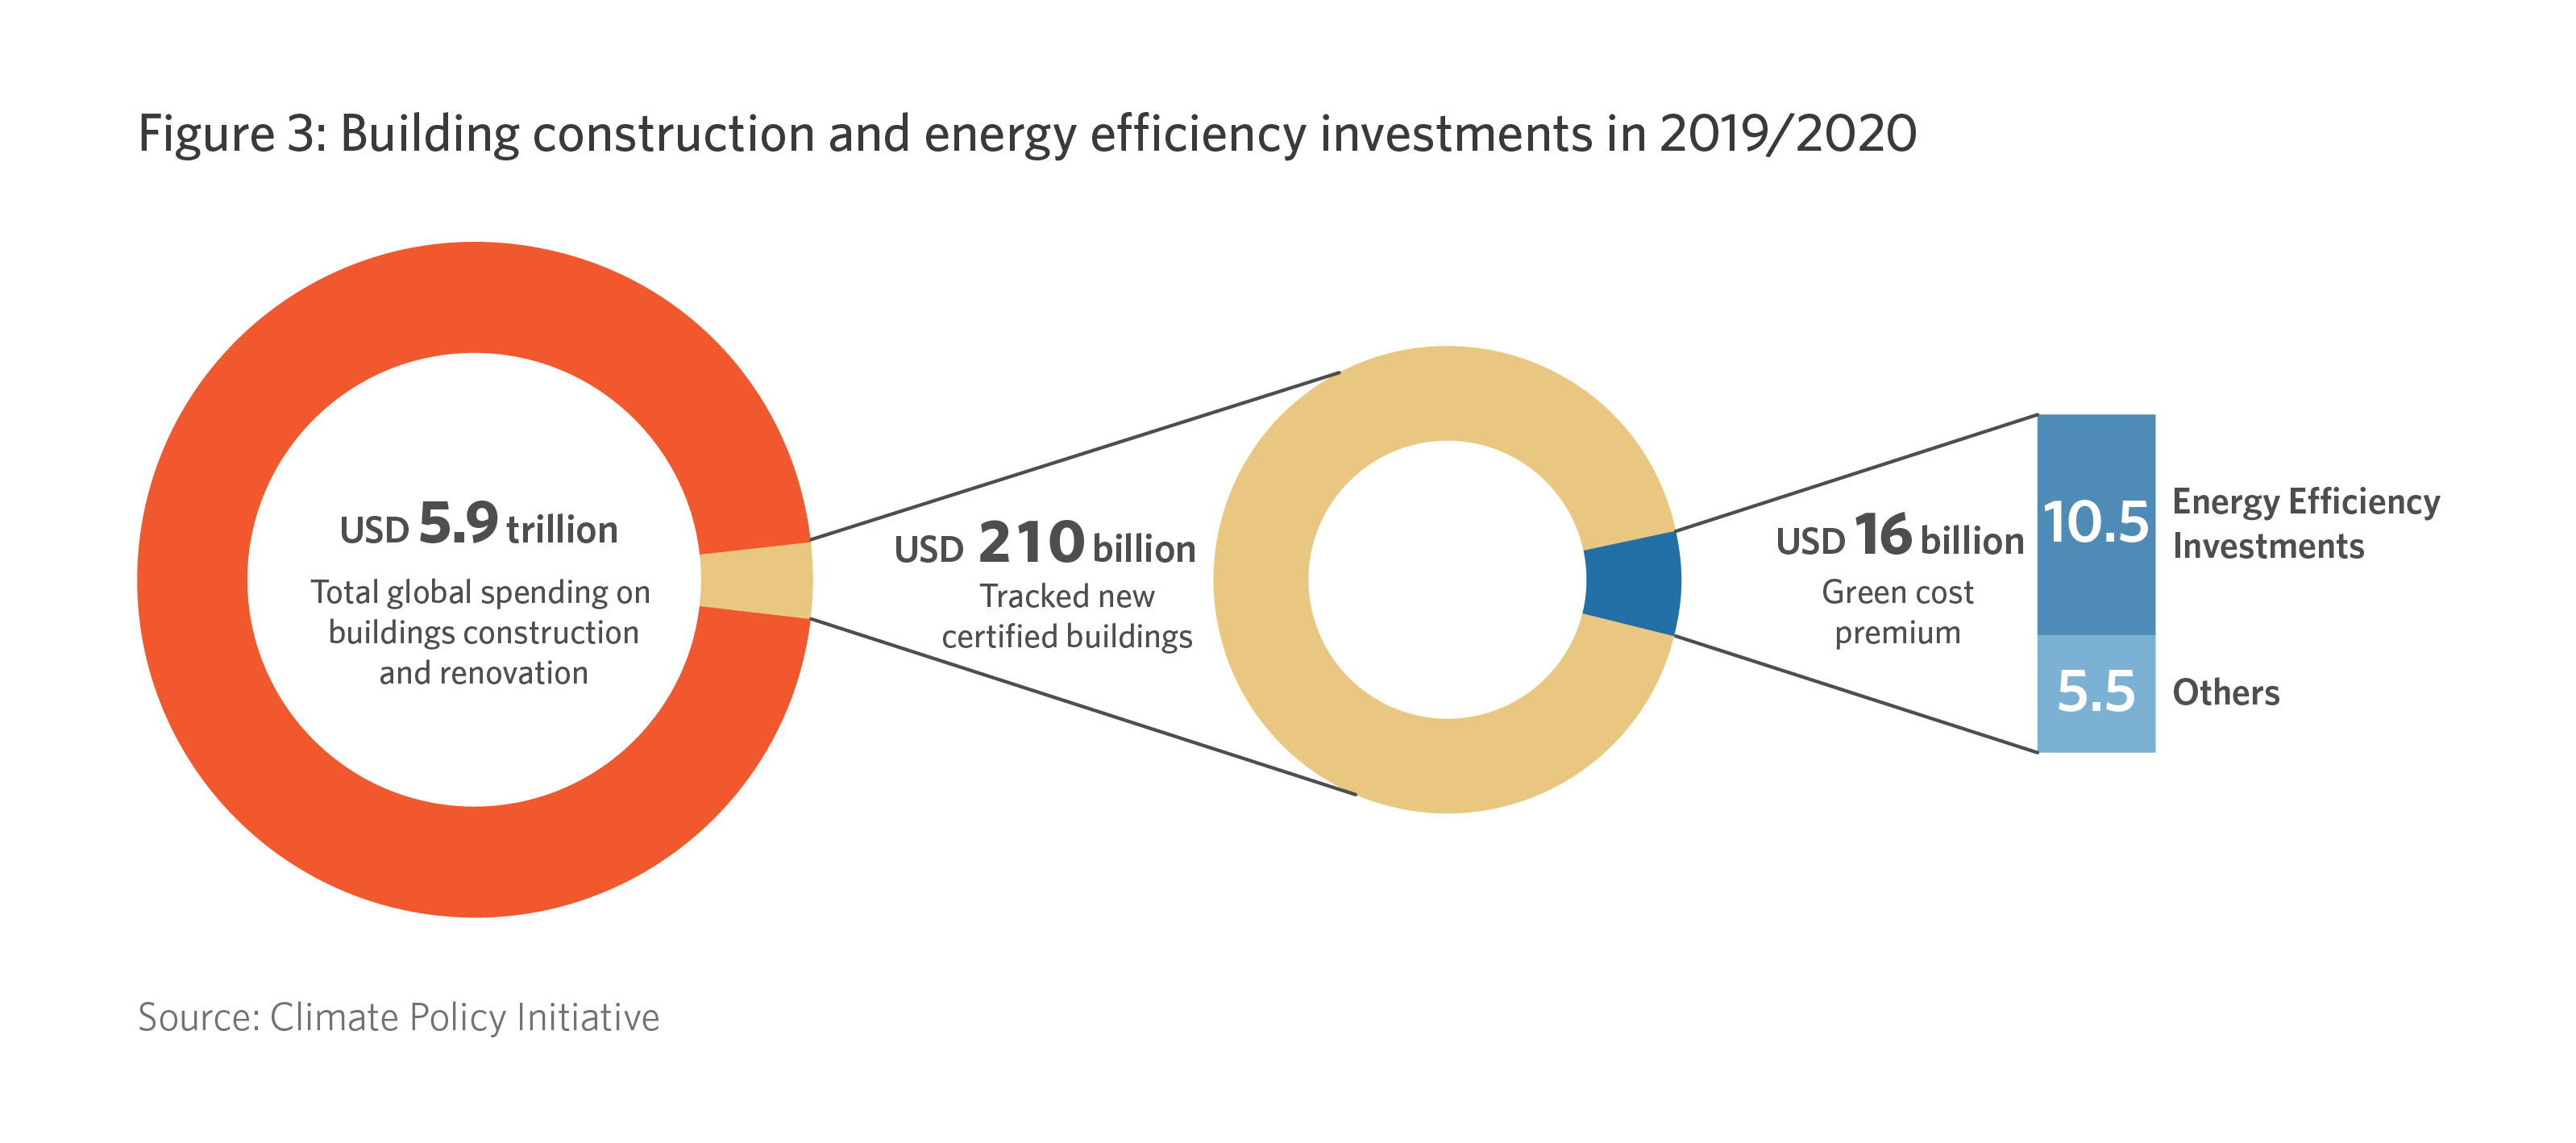 4.-Building-construction-and-energy-efficiency-investments-in-2019-2020